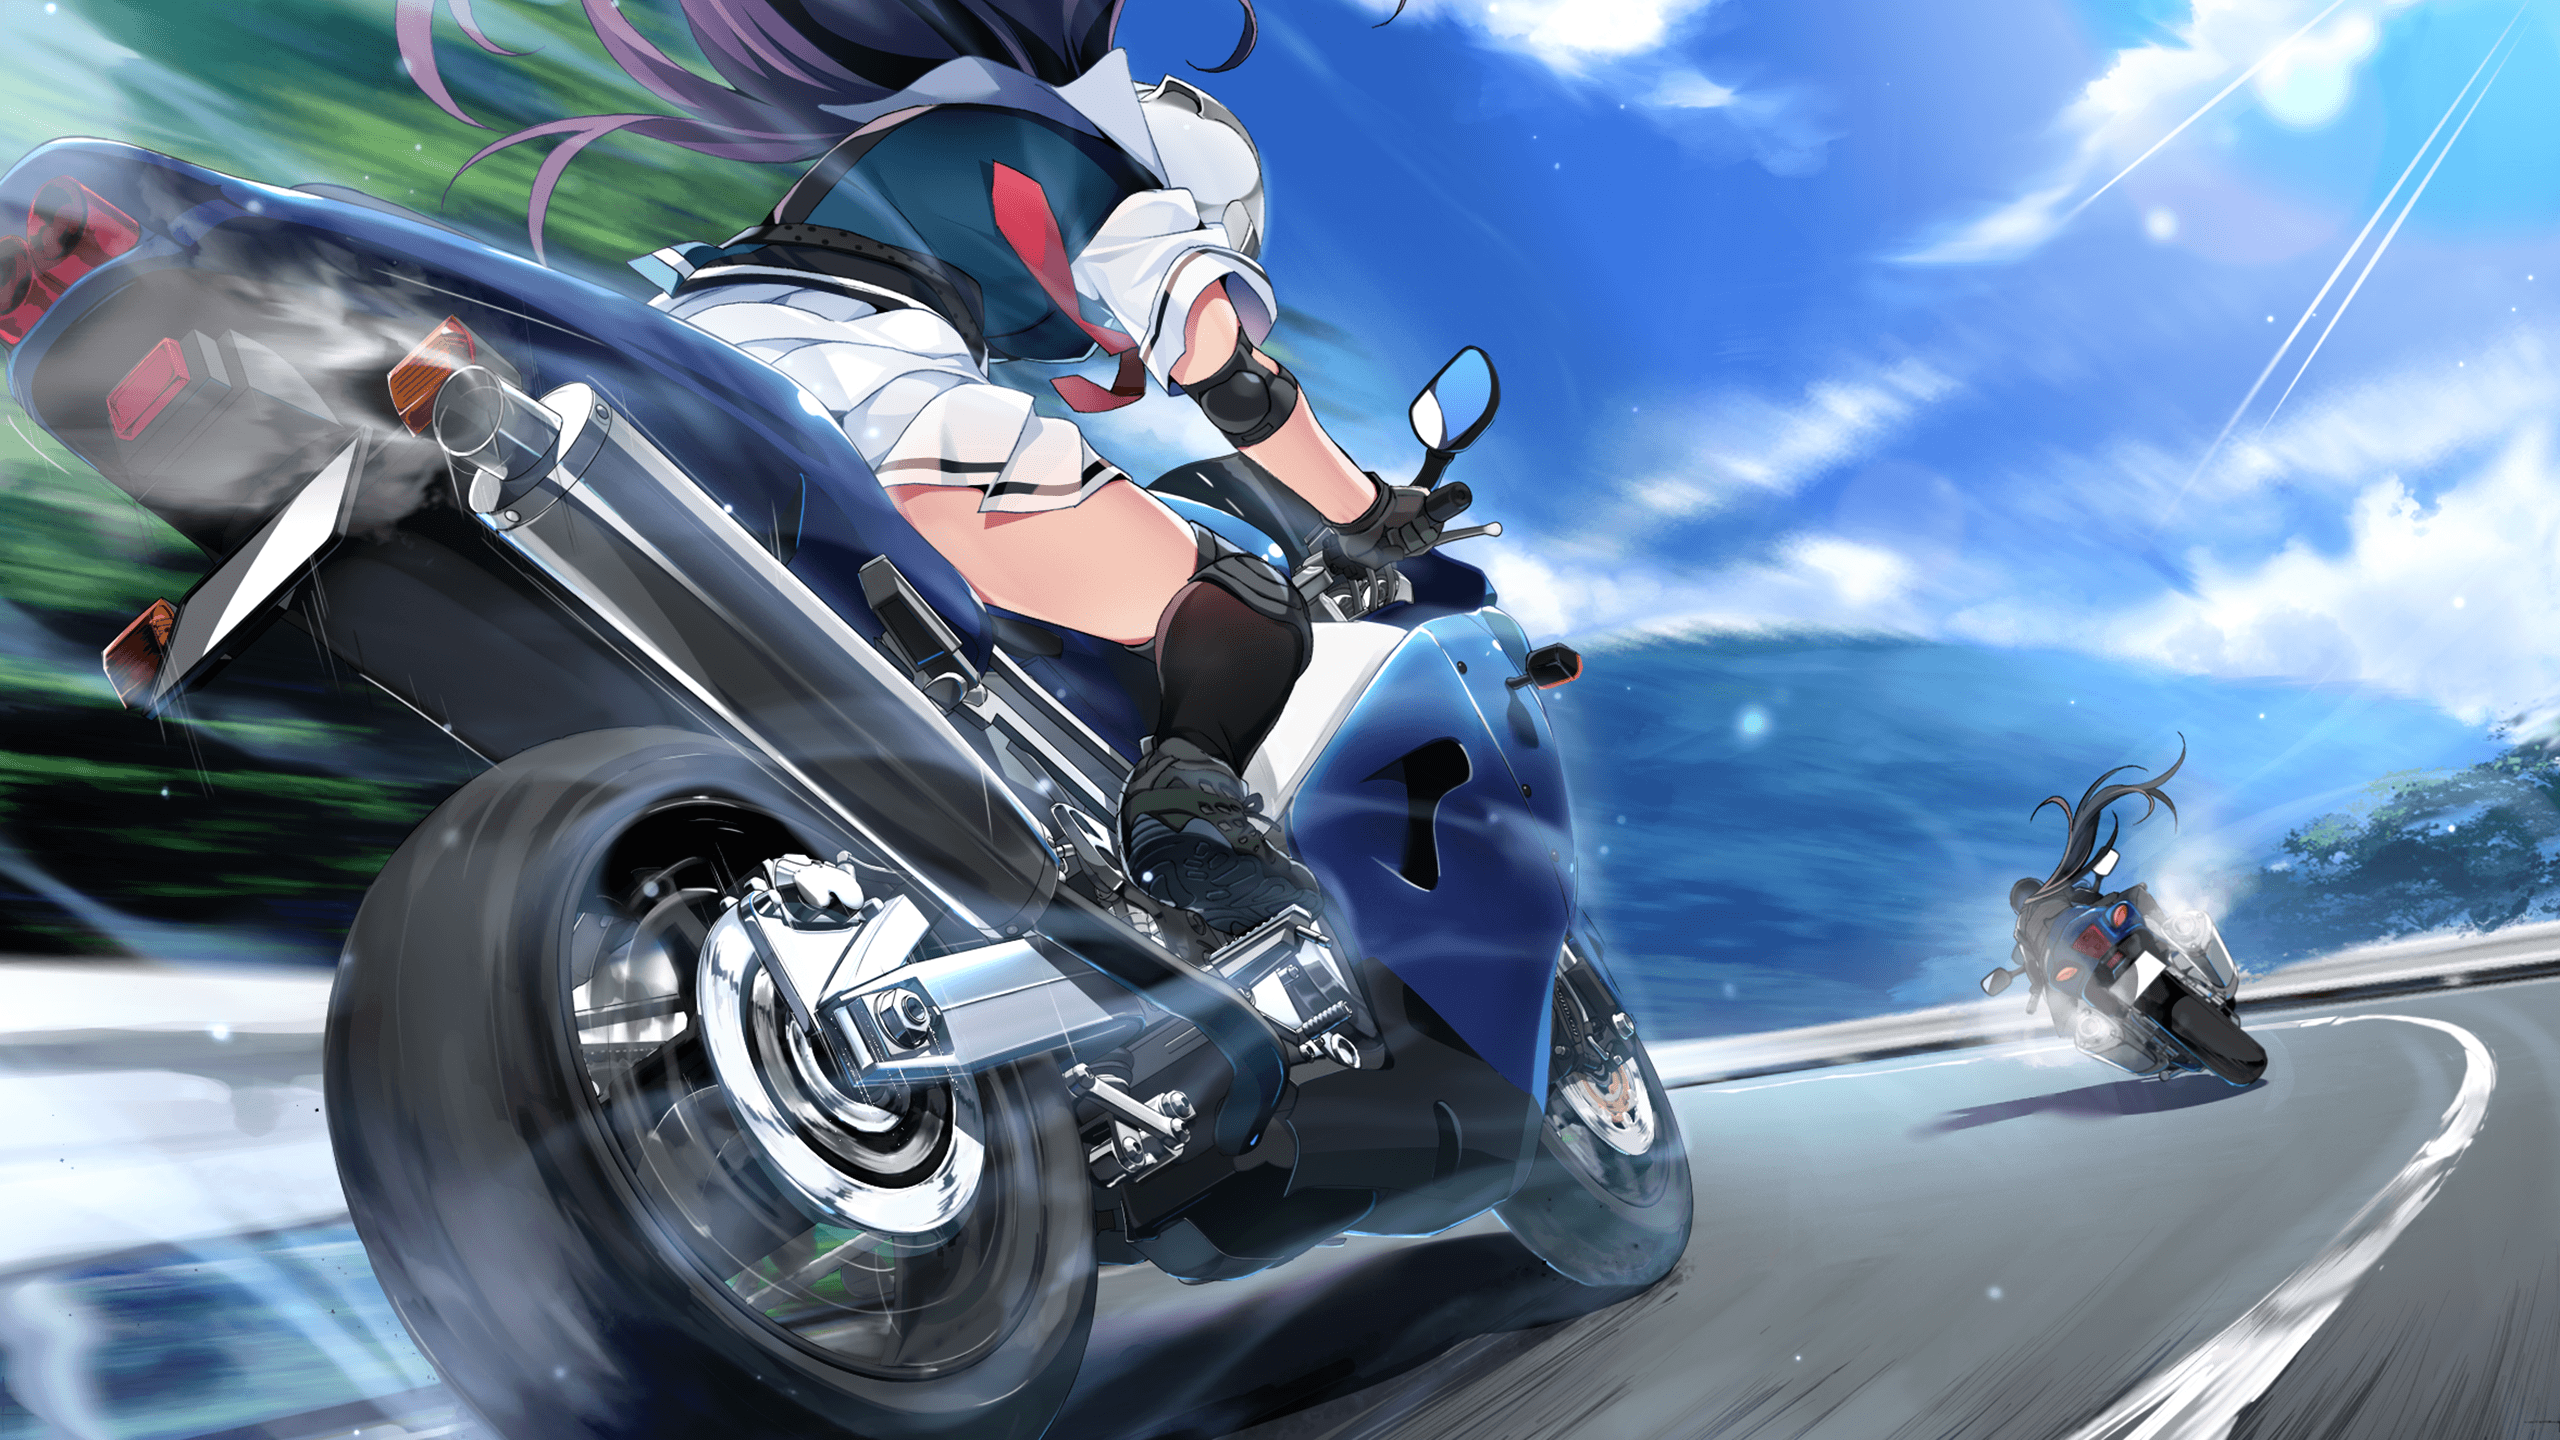 Motorcycle, Motorbike - Labrador Retriever Dog Fanny Anime Colorful Graphic  001 Painting by Aryu - Fine Art America